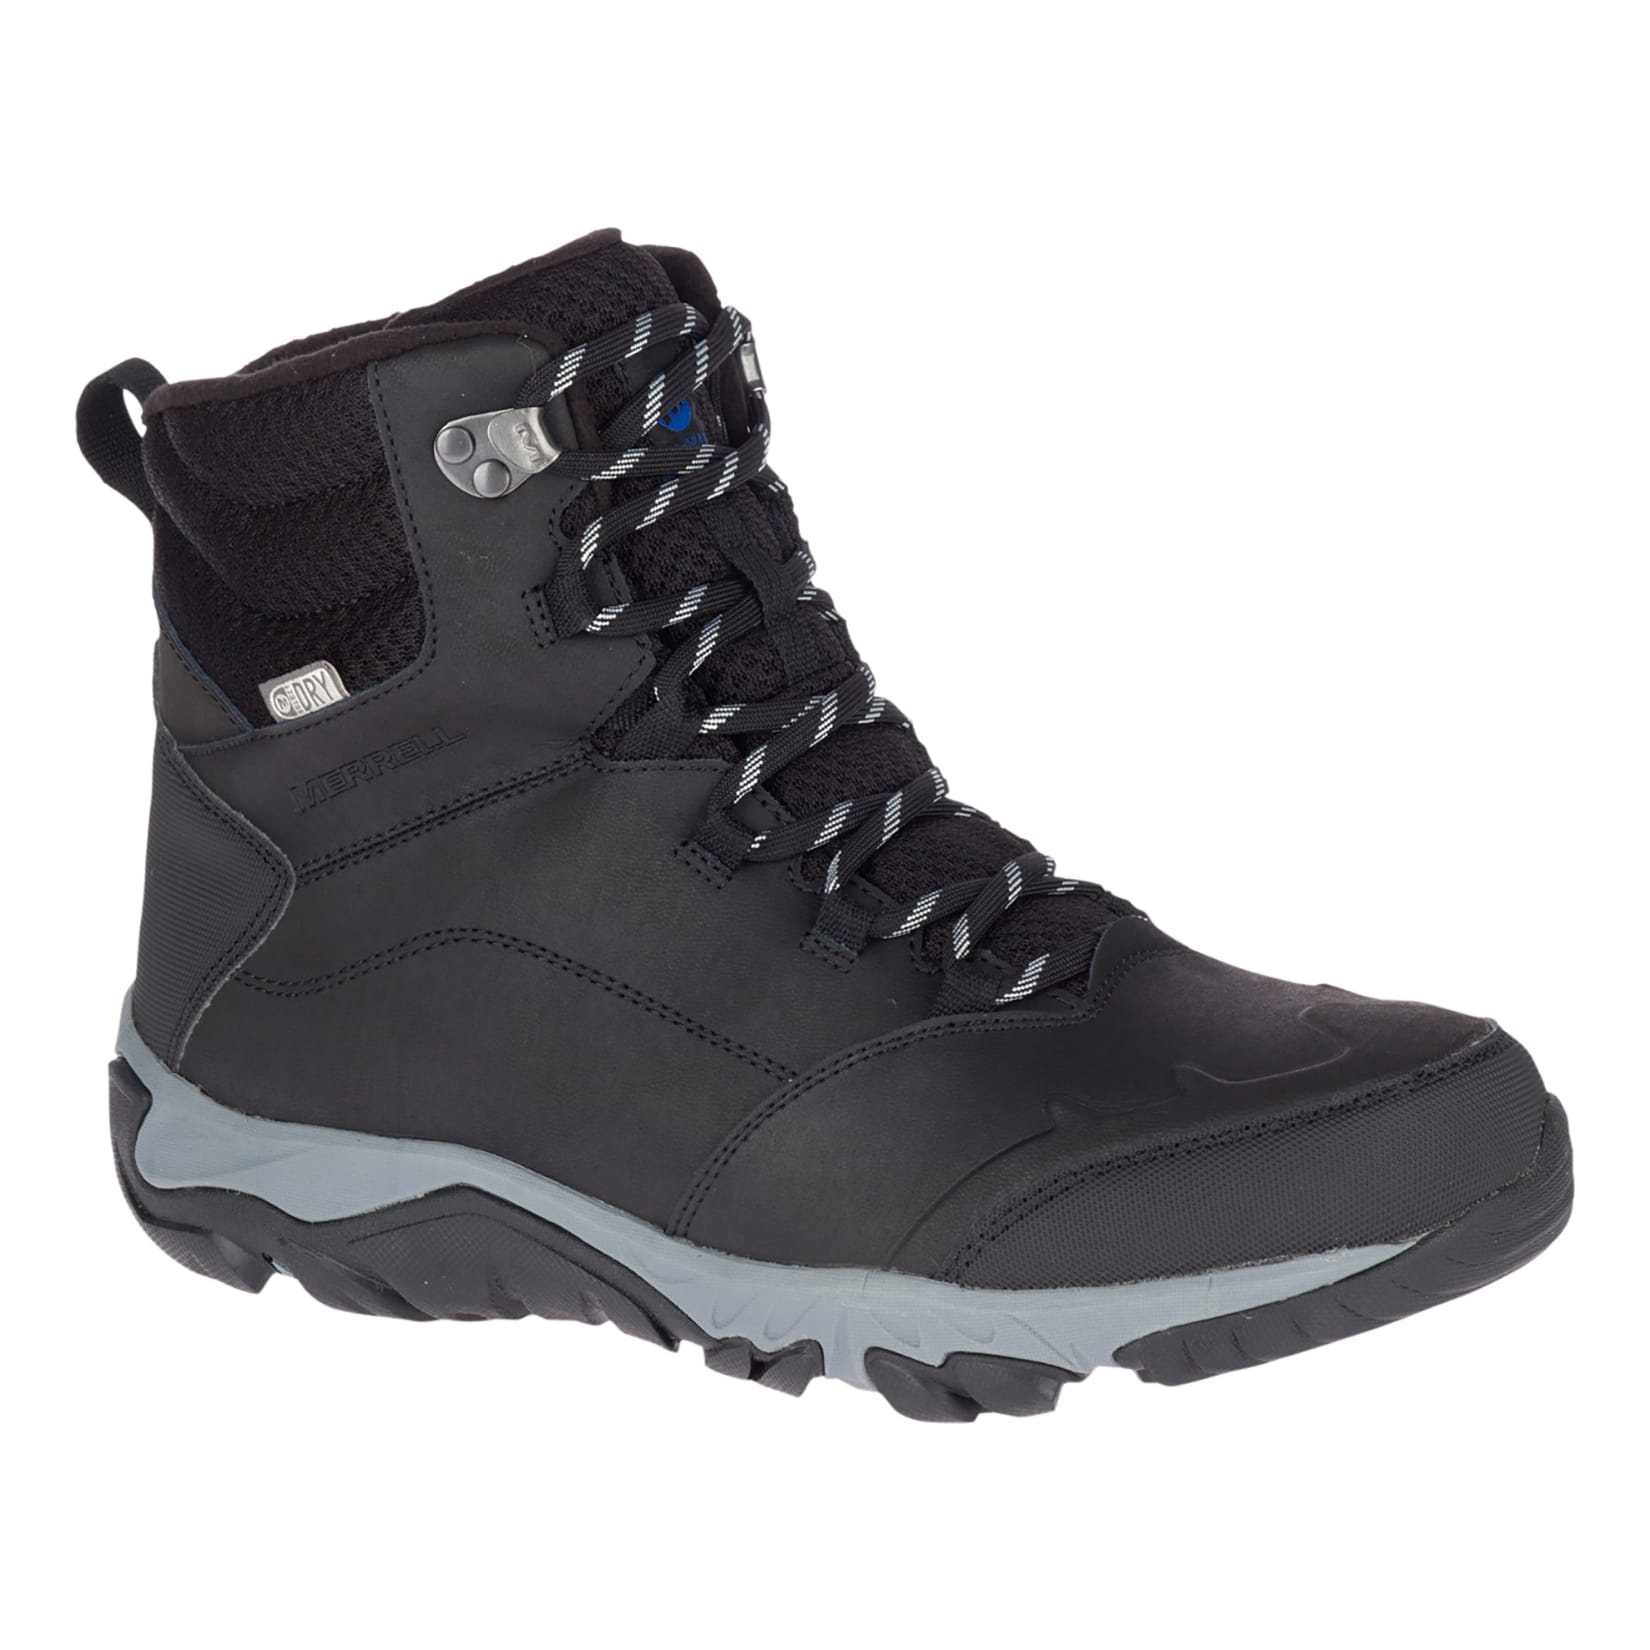 Merrell® Men’s Thermo Fractal Mid Waterproof Boot | Cabela's Canada